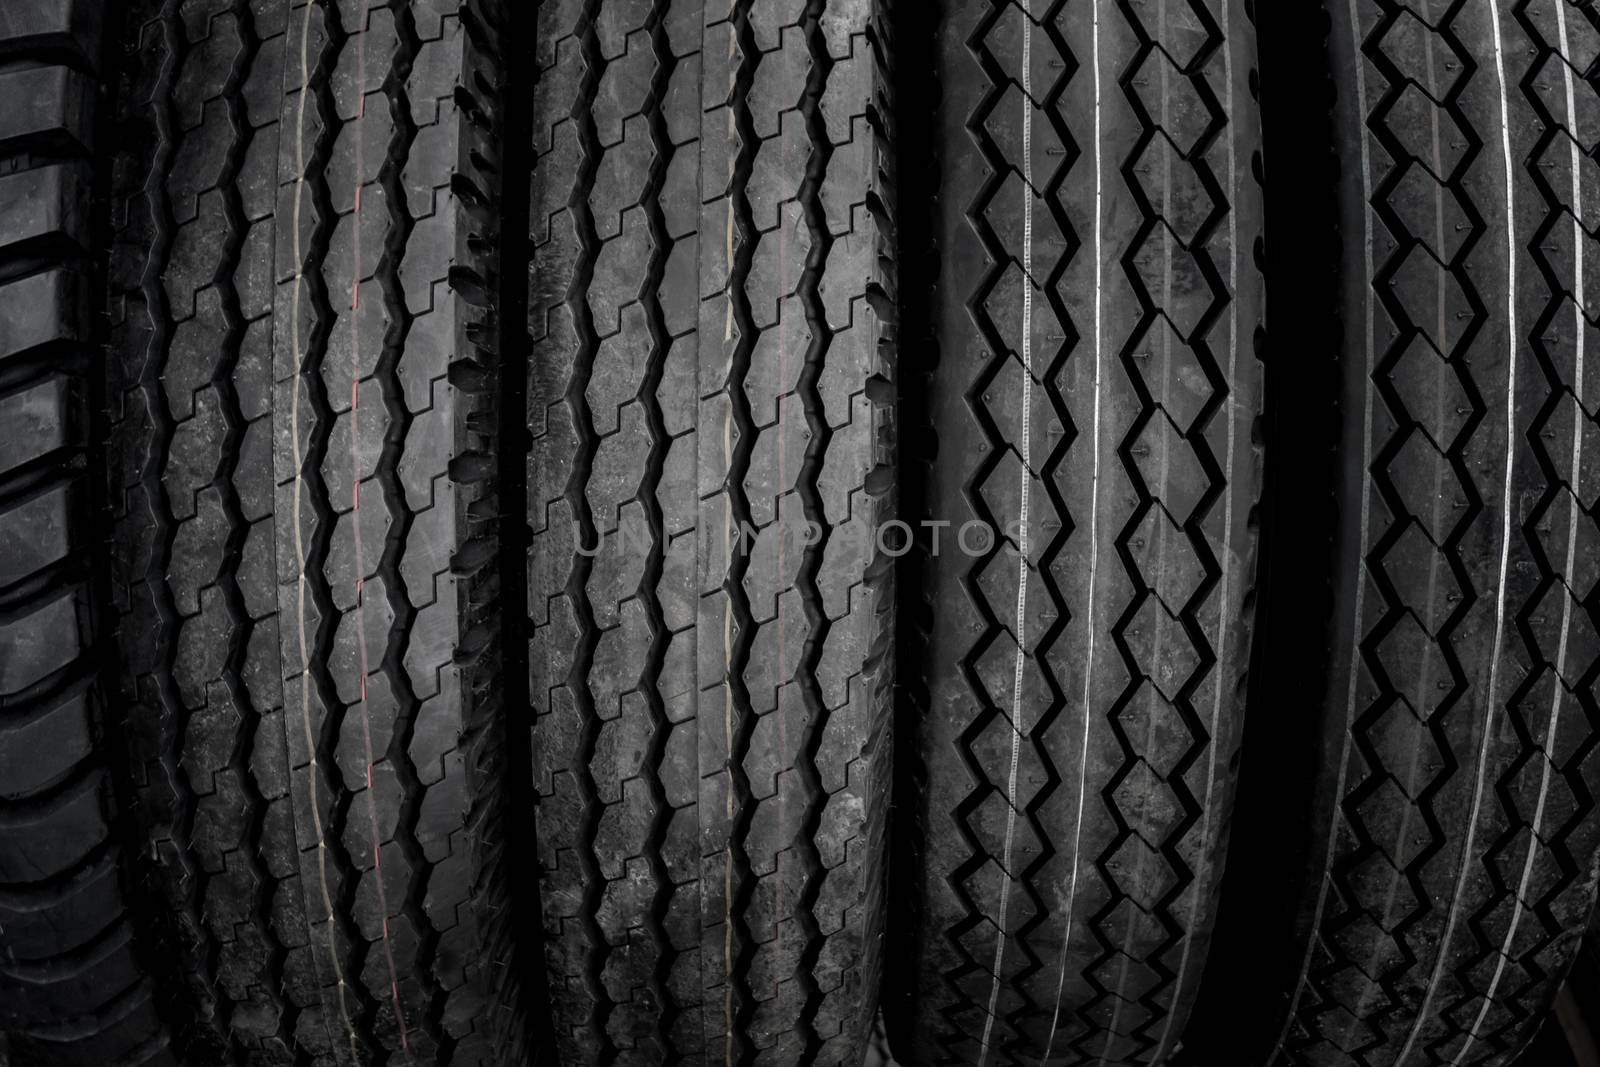 The background and texture of large tires that have been used and repaired for re-use.